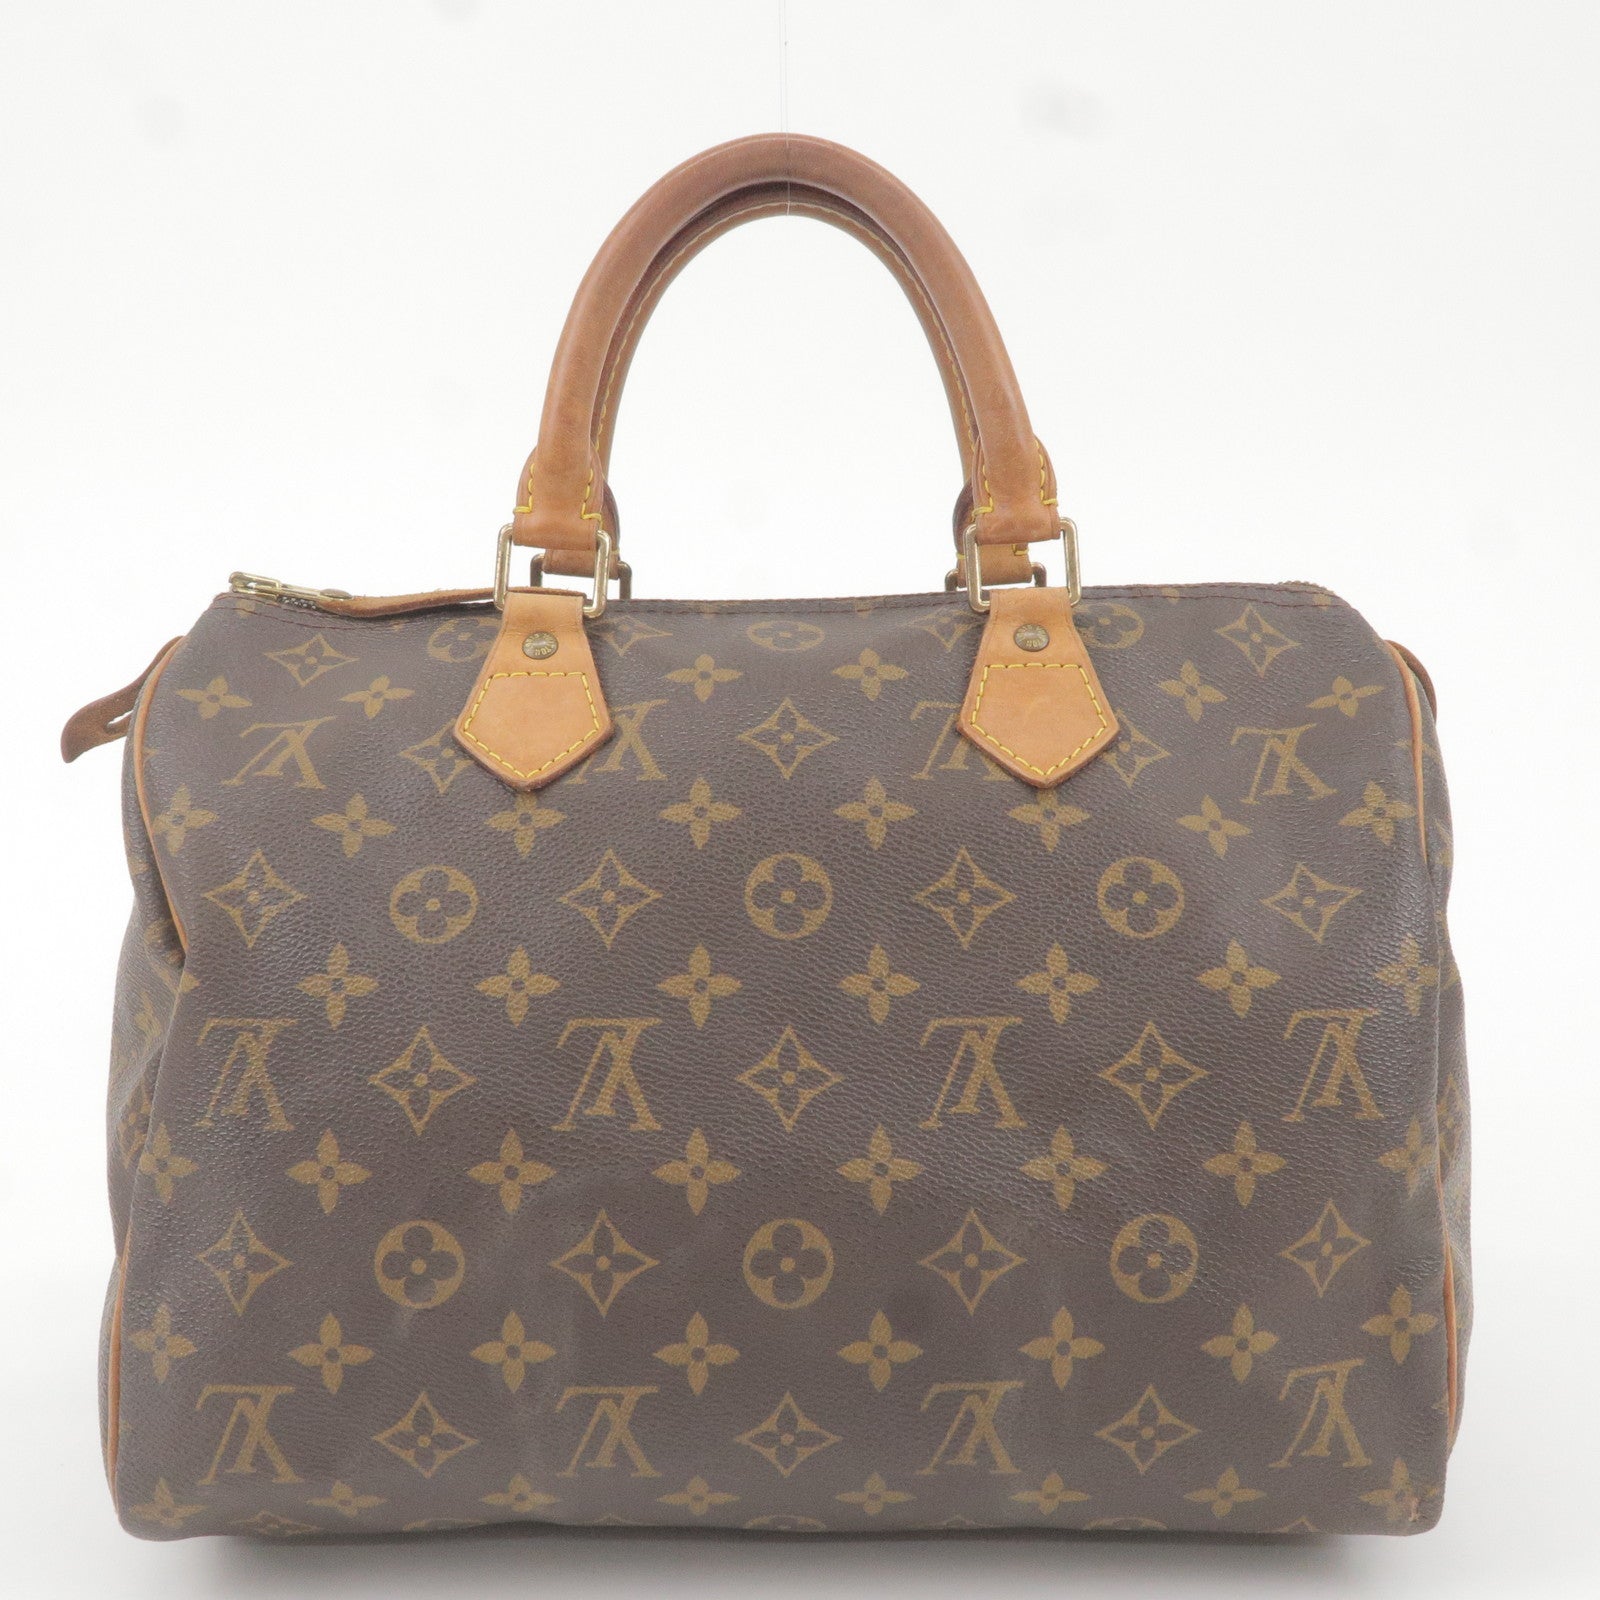 Used croisette more expensive than new? : r/Louisvuitton